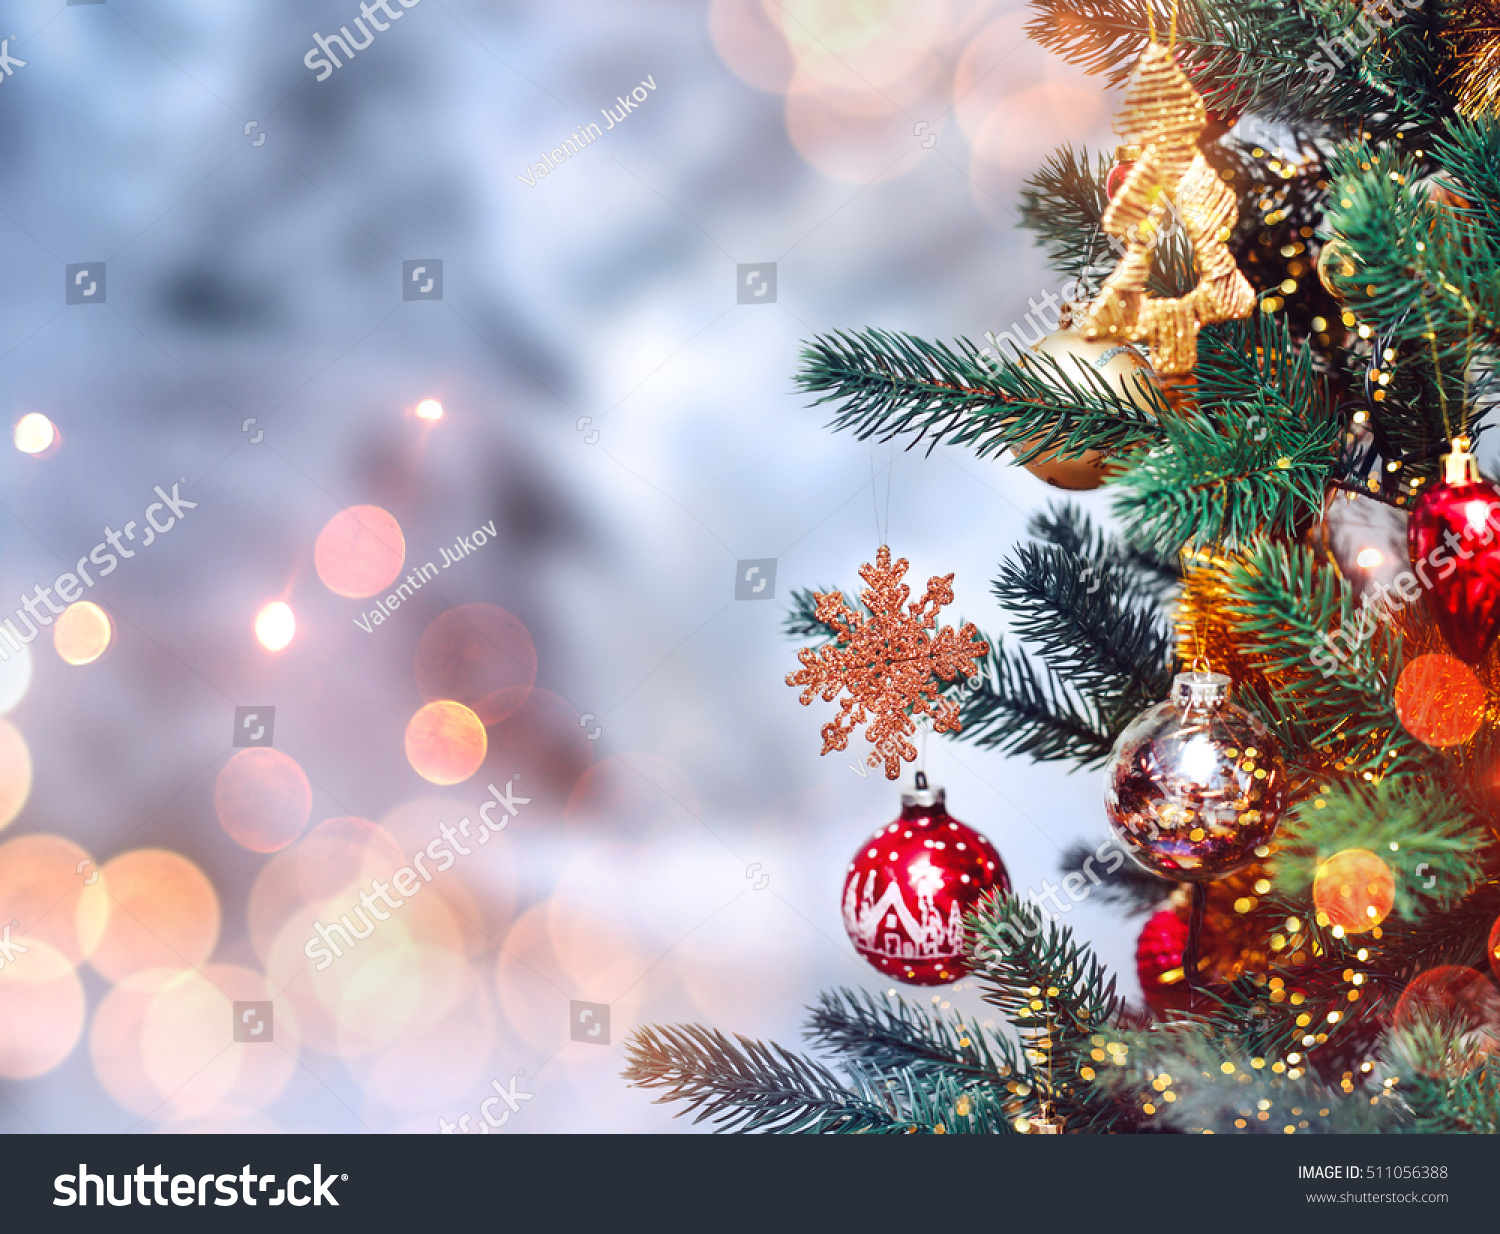 Christmas tree background and Christmas decorations with snow, blurred, sparking, glowing. Happy New Year and Xmas theme #511056388